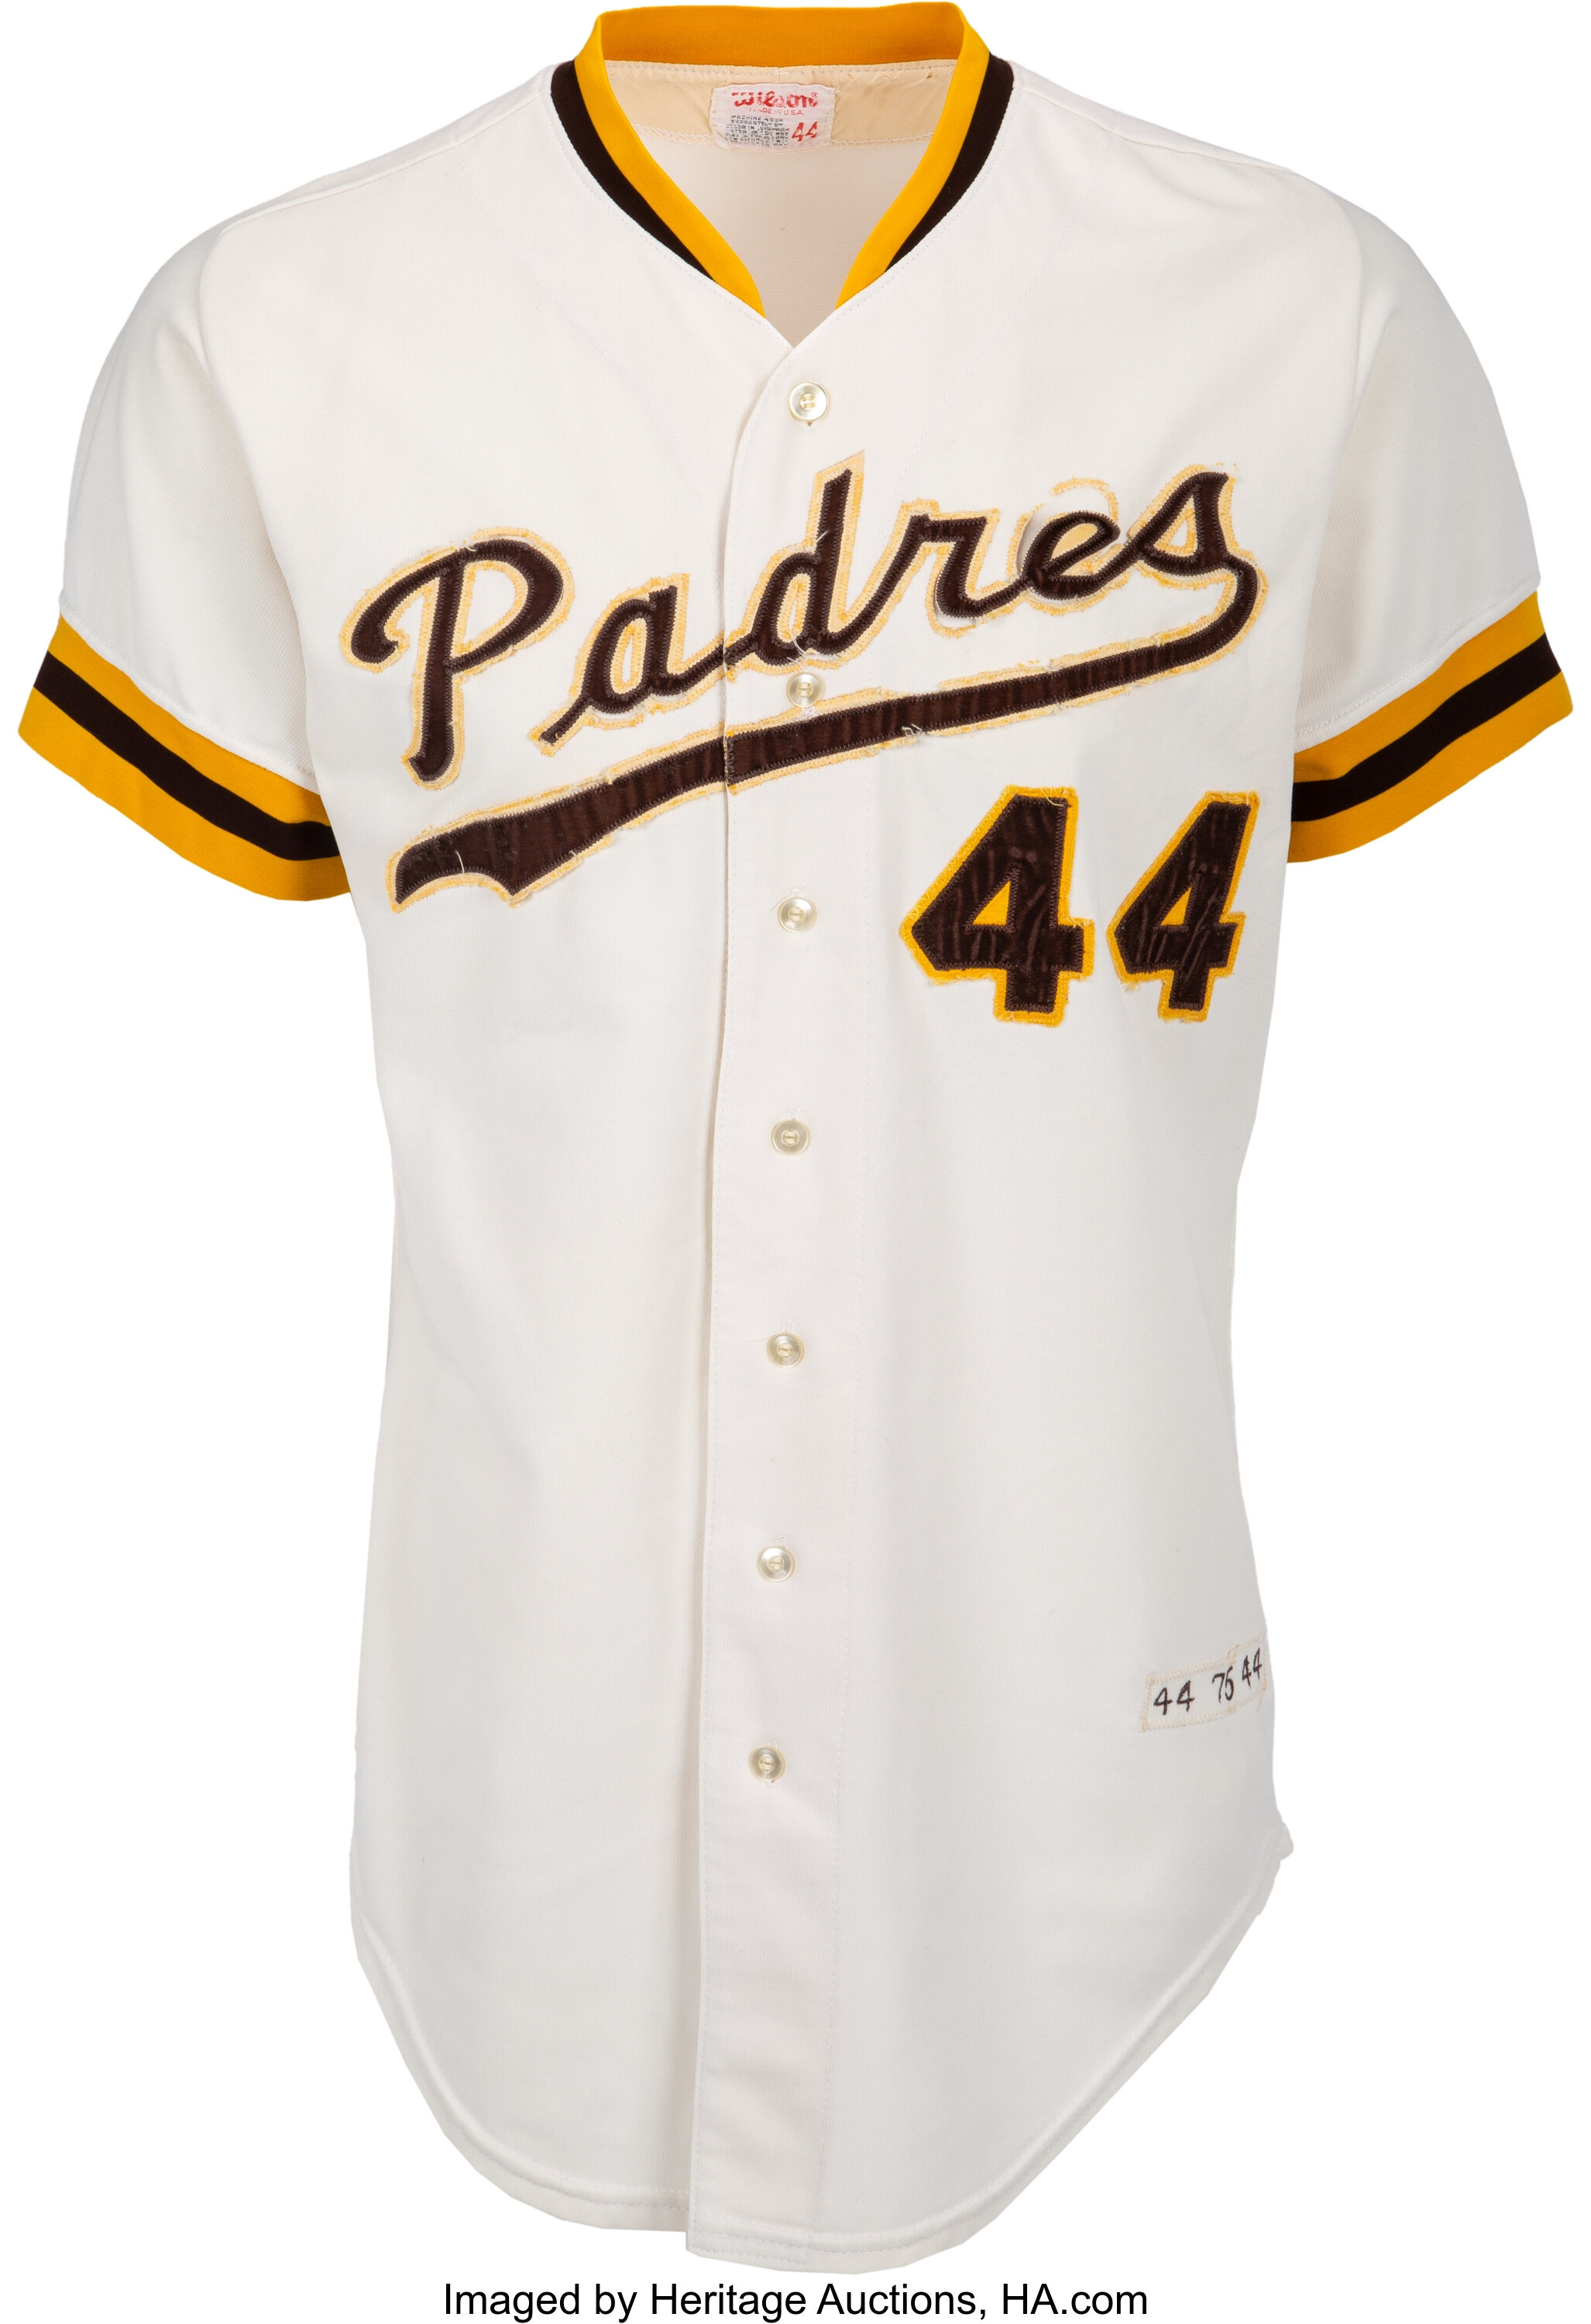 1975 Willie McCovey Game Worn San Diego Padres Jersey. Baseball